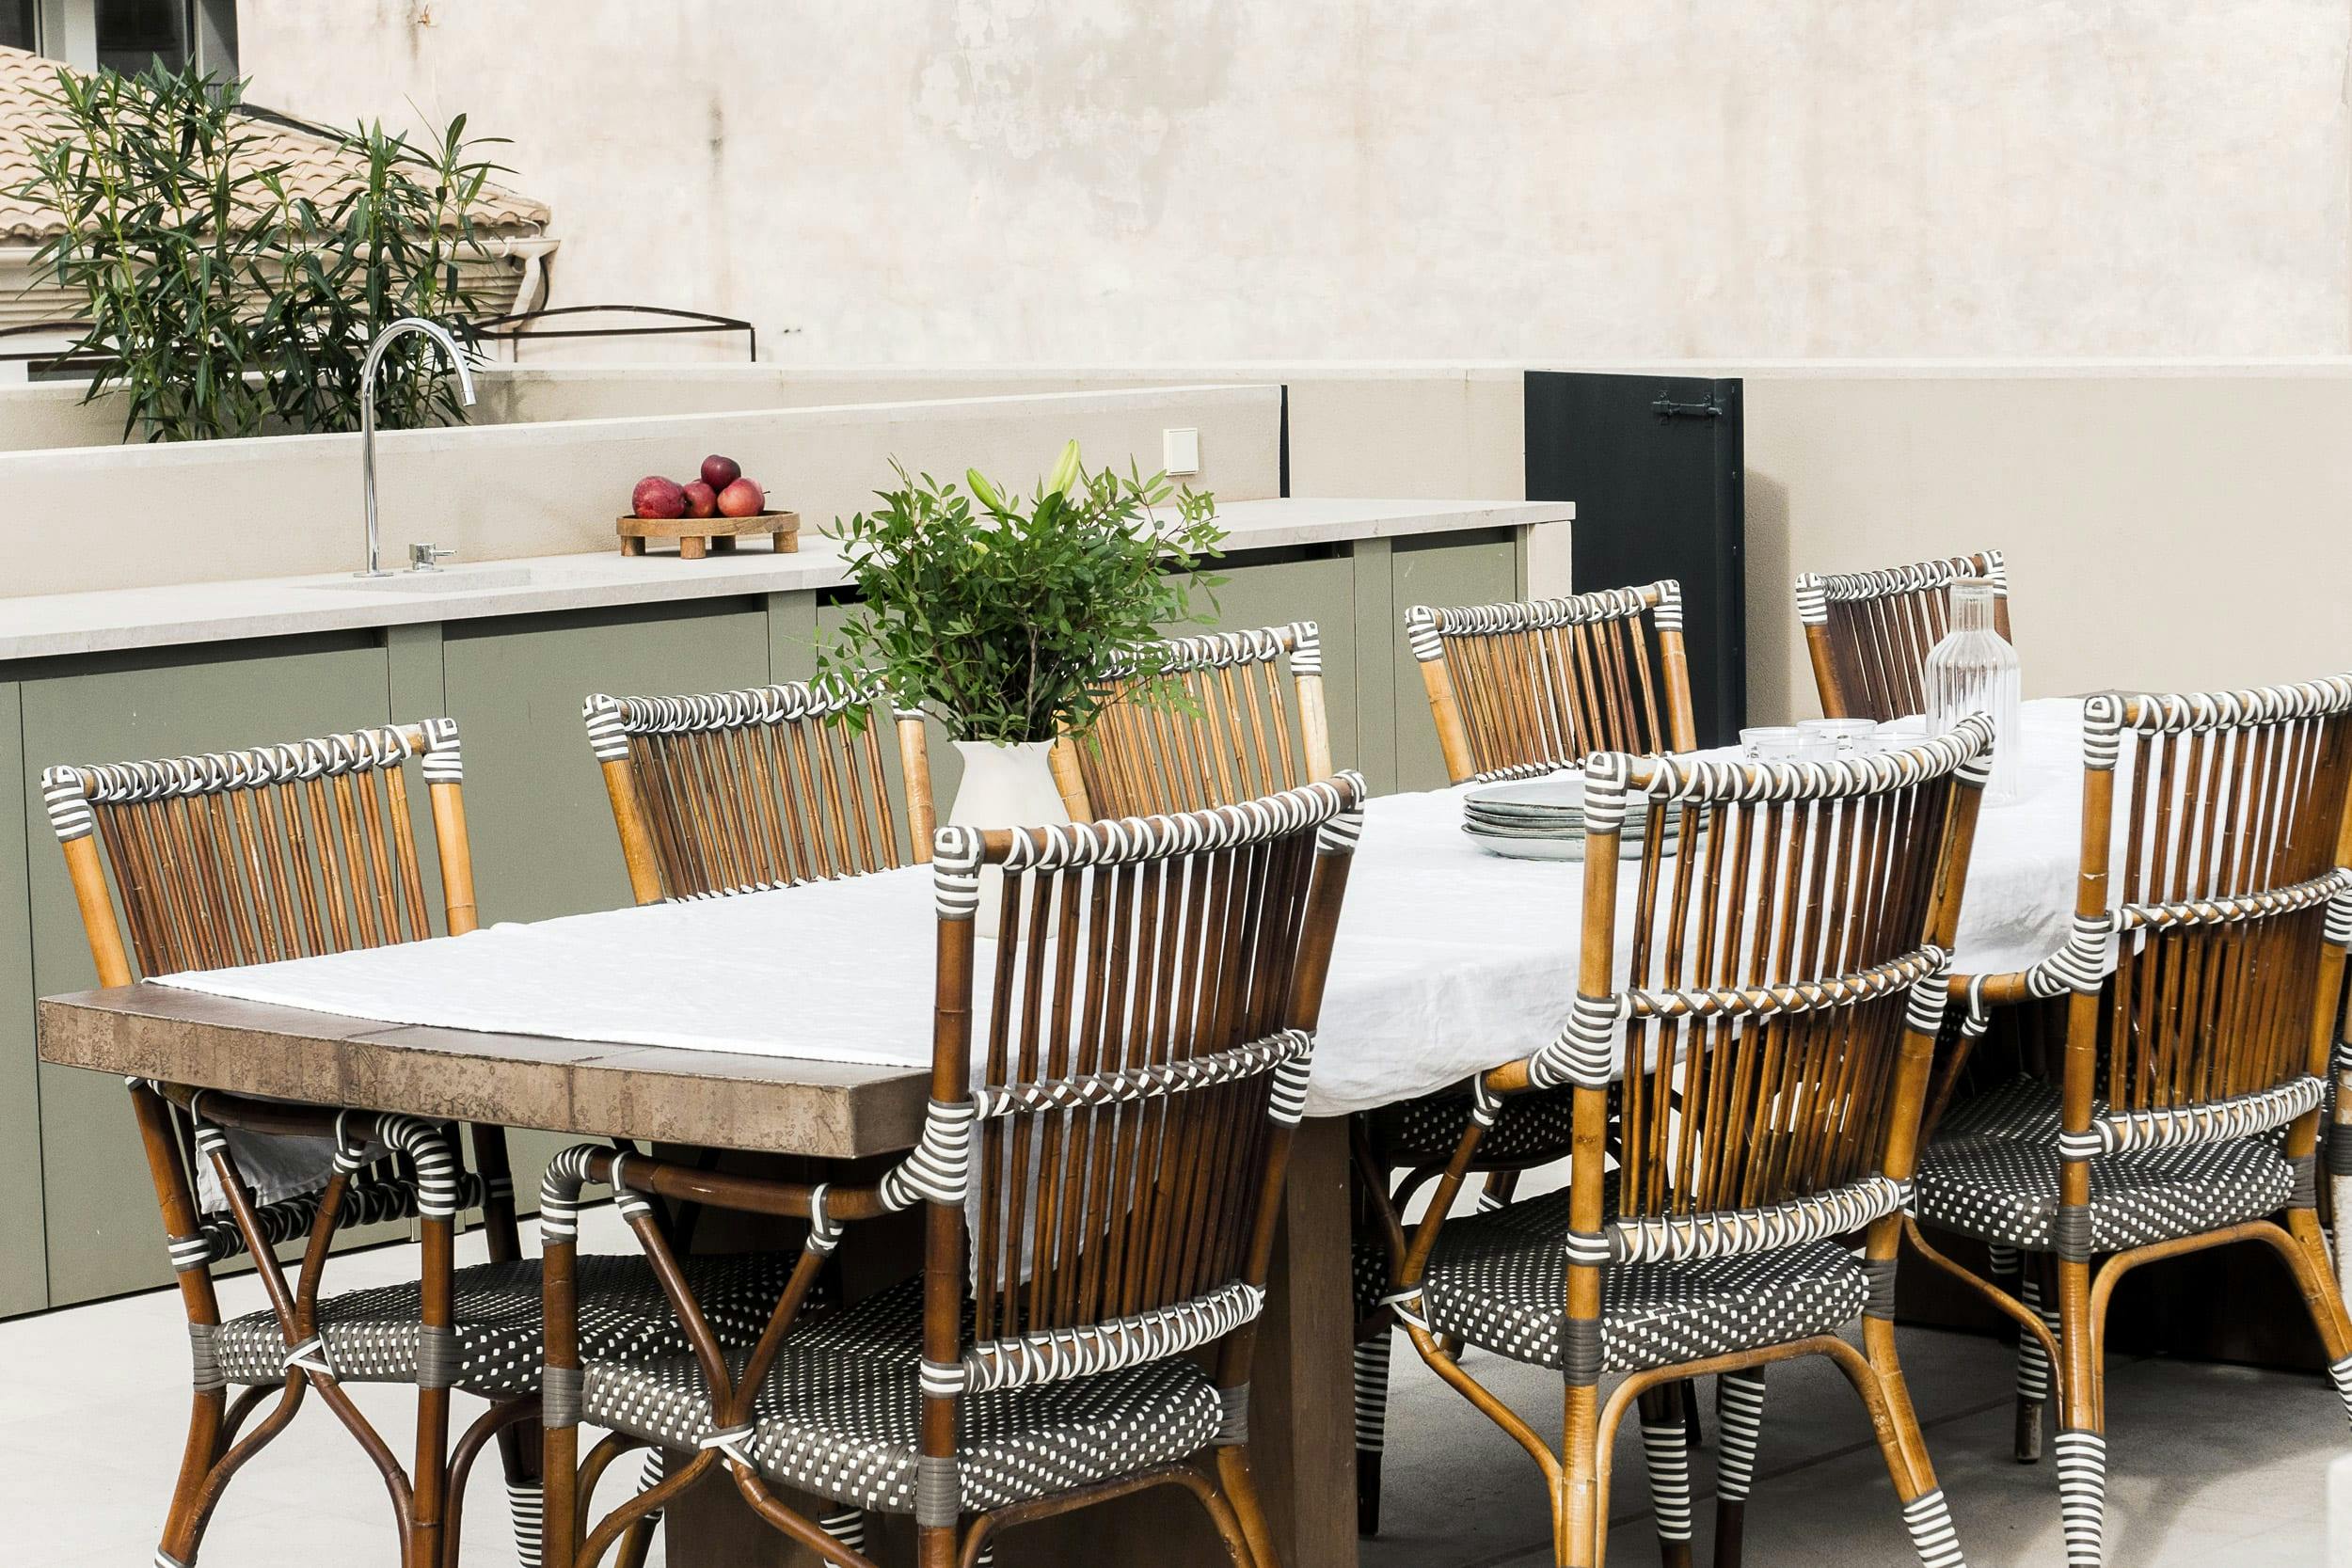 The image features a large outdoor dining area with a table and chairs, surrounded by a patio with a potted plant and a vase.